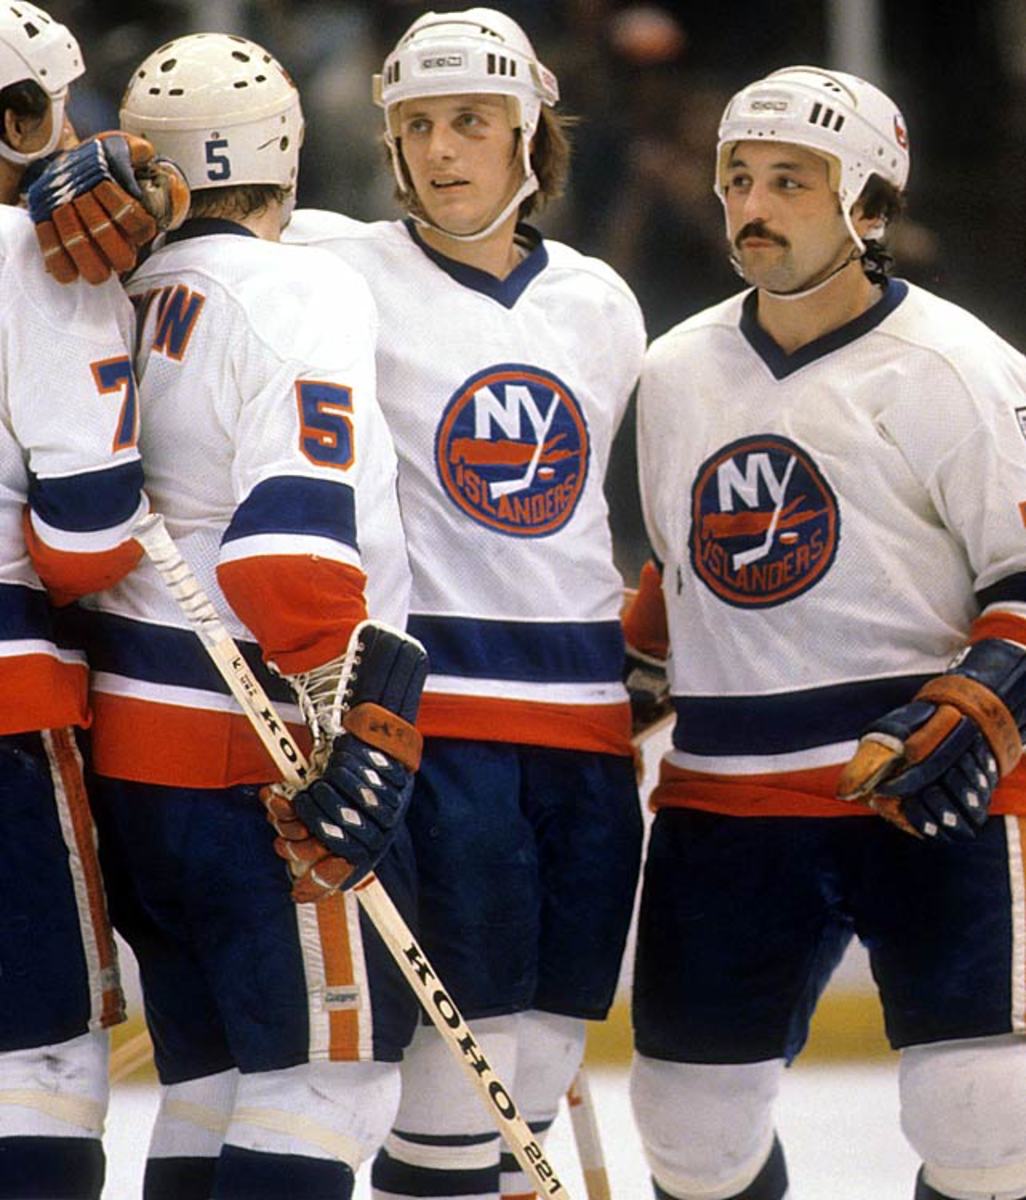 Mike Bossy, Bryan Trottier and Denis Potvin